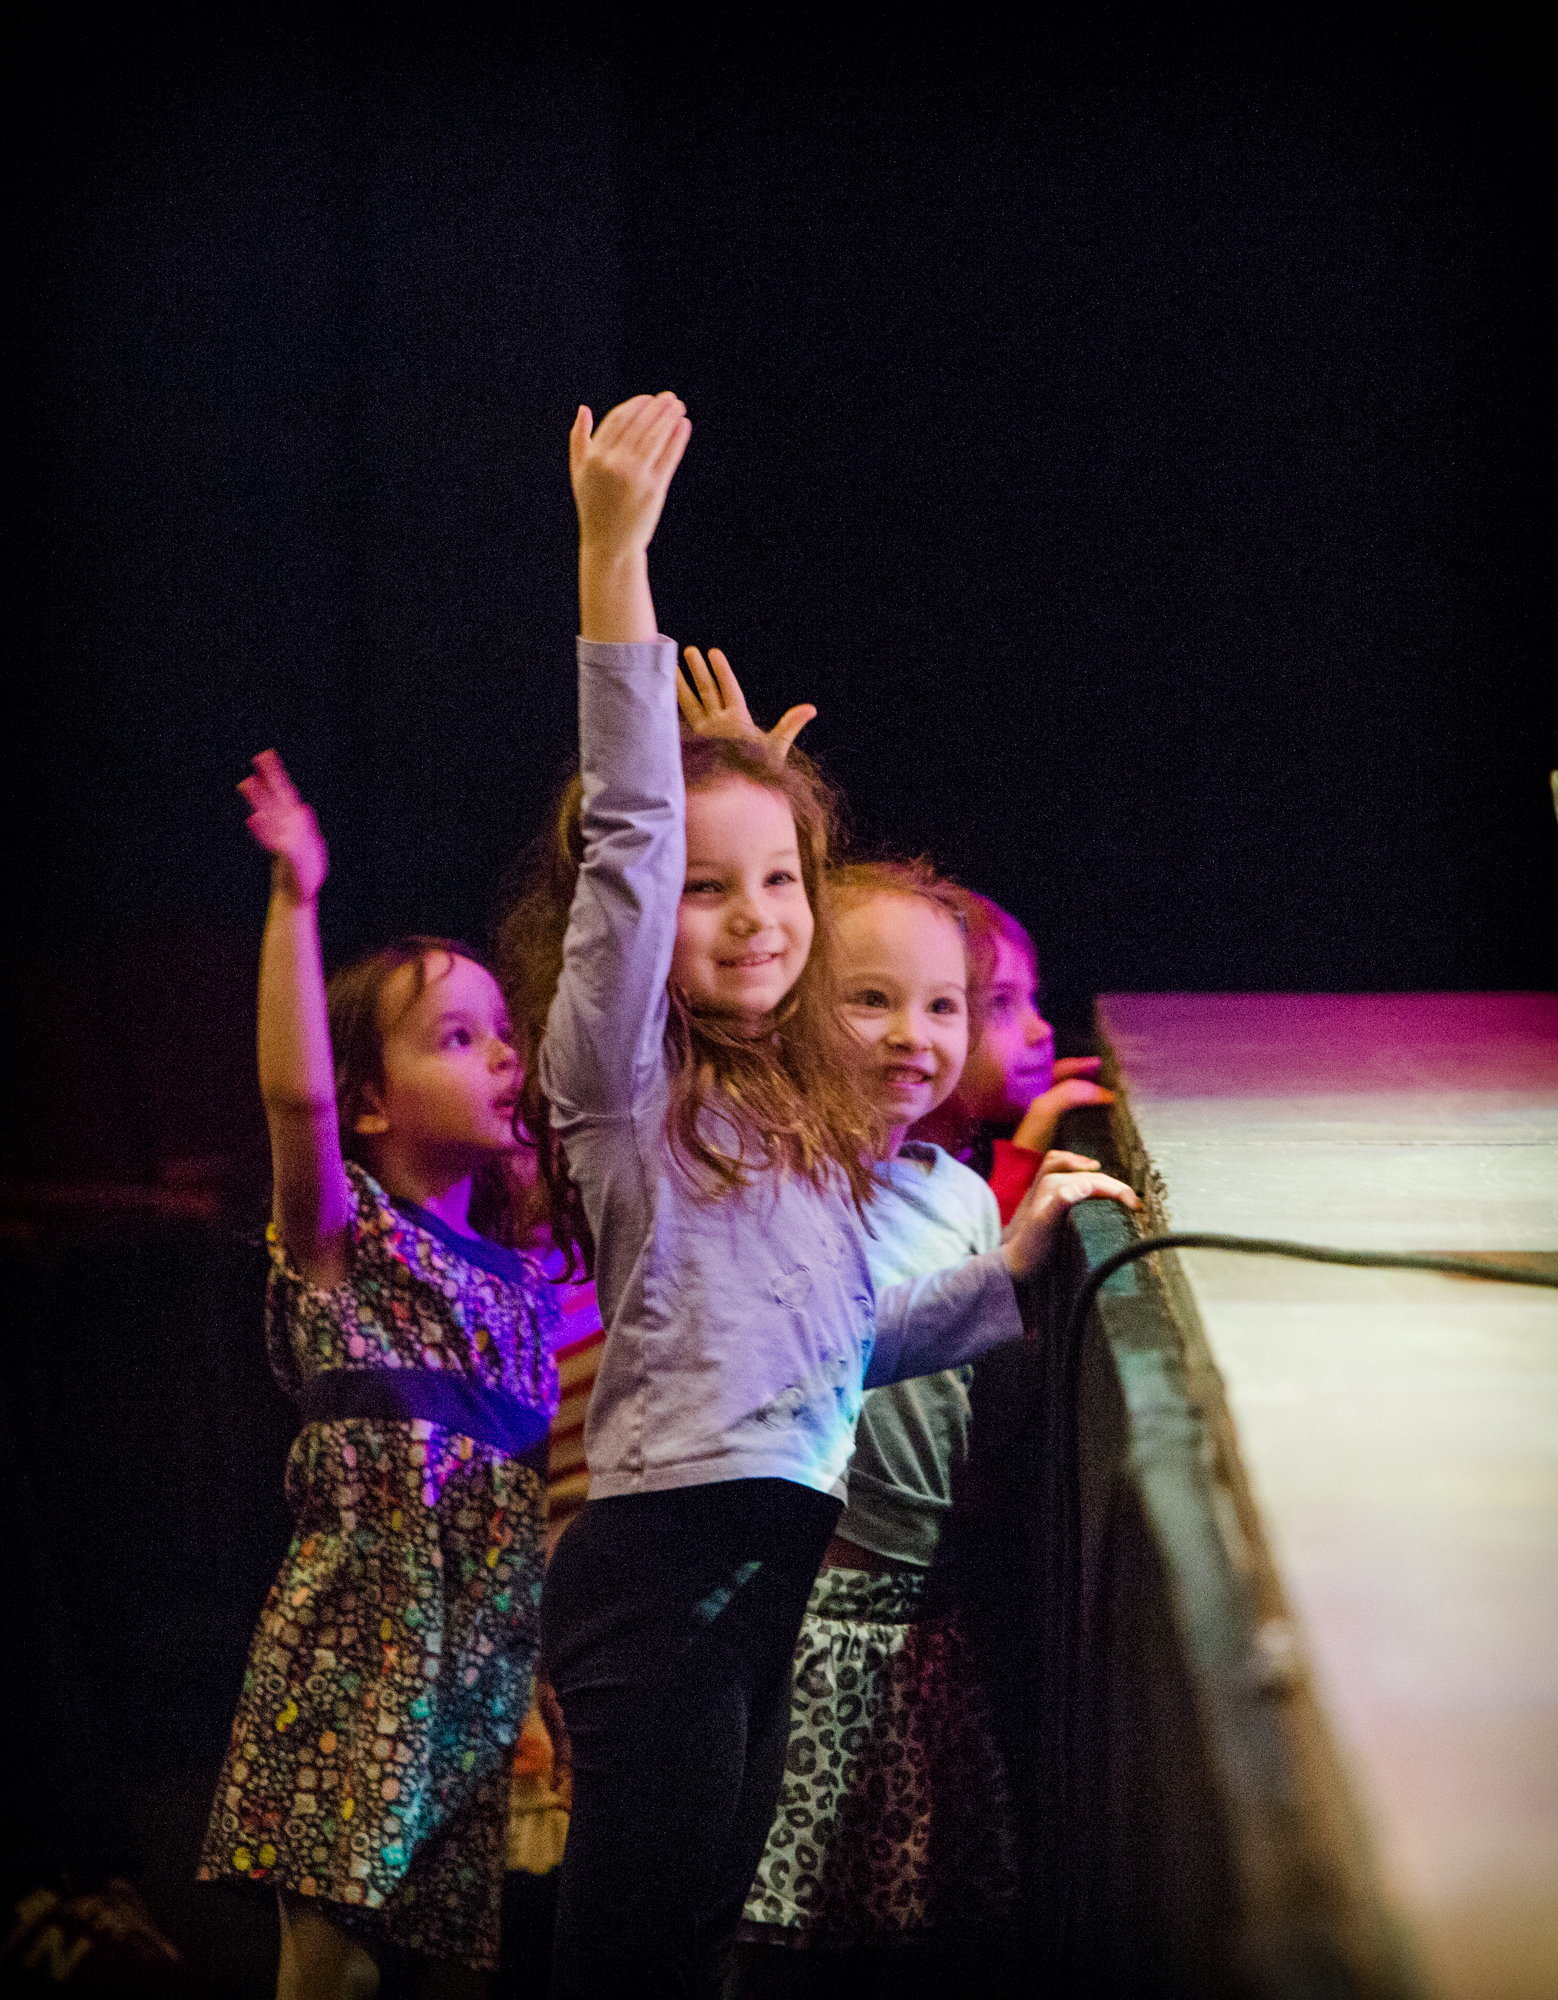 Symphony Space offers a variety of engaging performances and events for children.